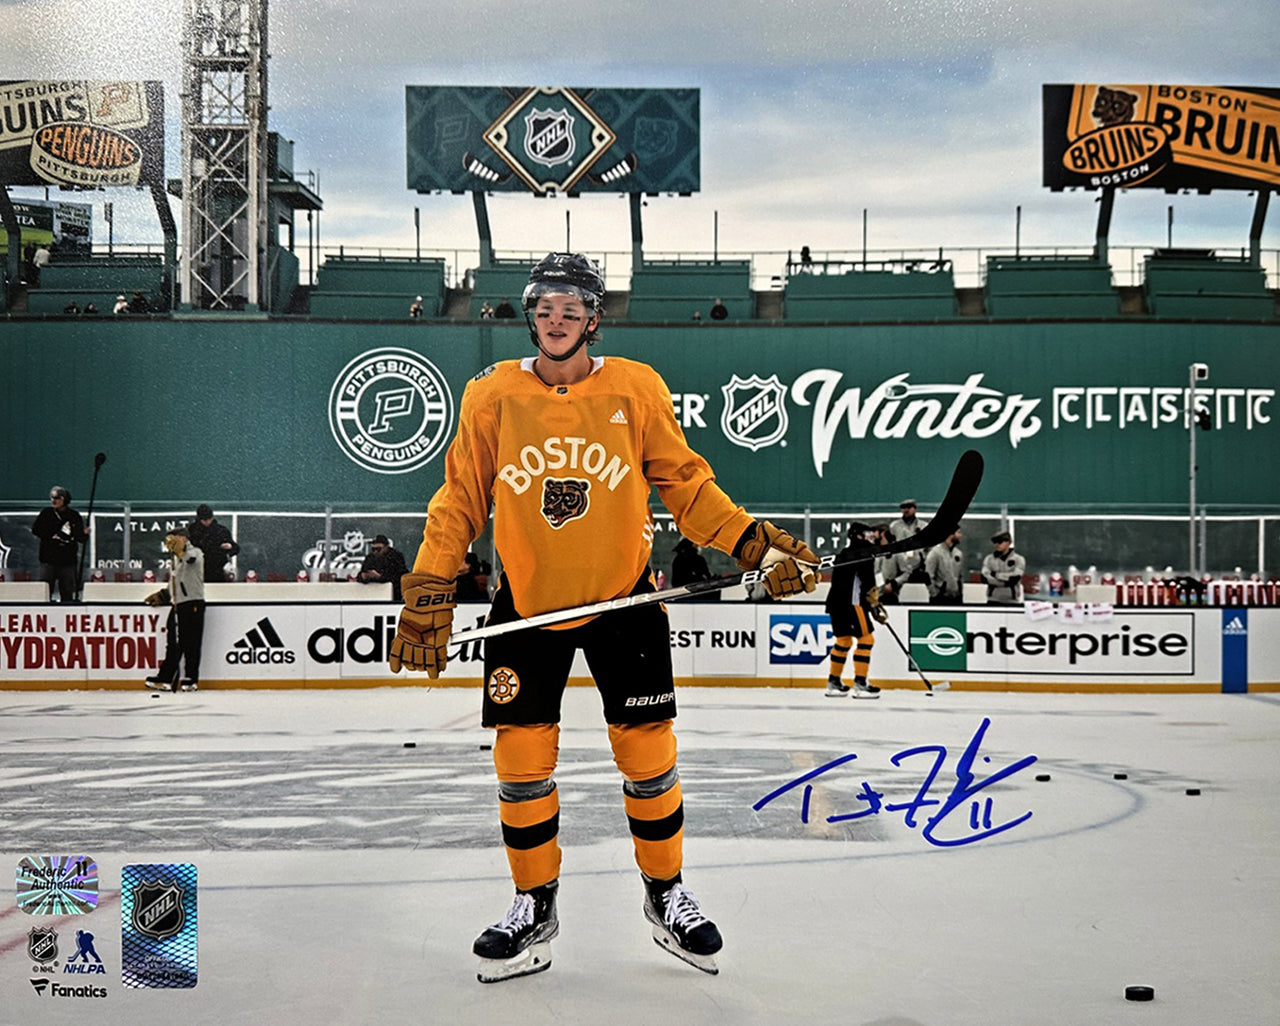 Trent Frederic Winter Classic Action Boston Bruins Autographed 11" x 14" Hockey Photo